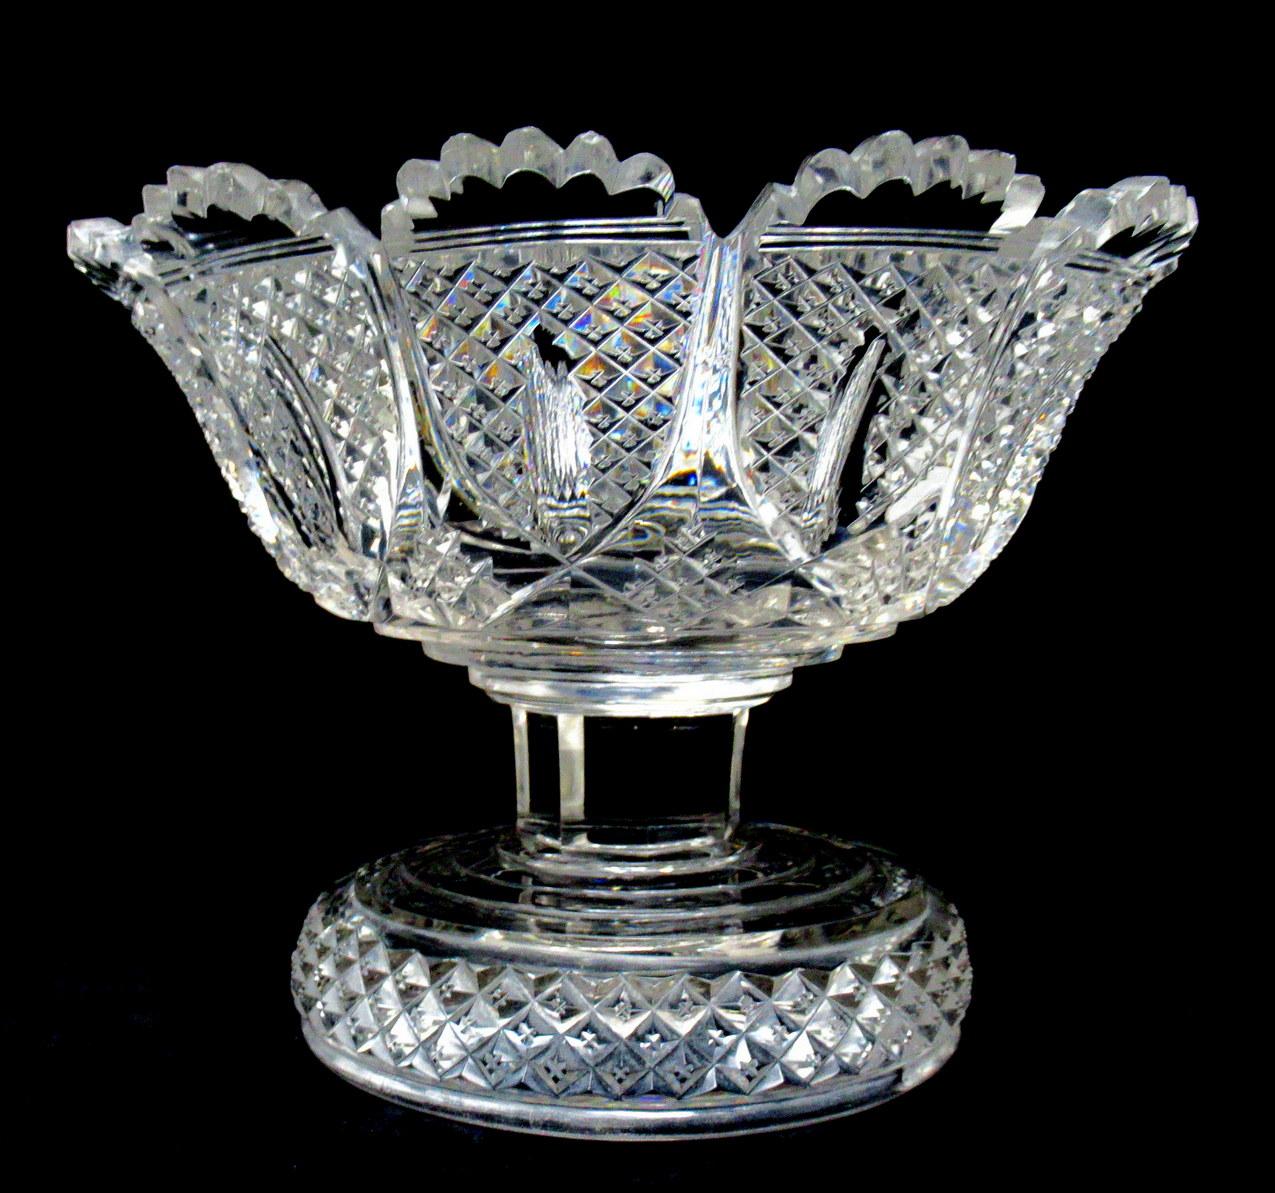 Stunning and Extremely Rare English heavy gauge hand cut full lead crystal fruit bowl or centerpiece of traditional outline, of outstanding quality and condition. Circa 1840 - 1860. 

The unusual fan-cut decorative rim above a deep cut diamond